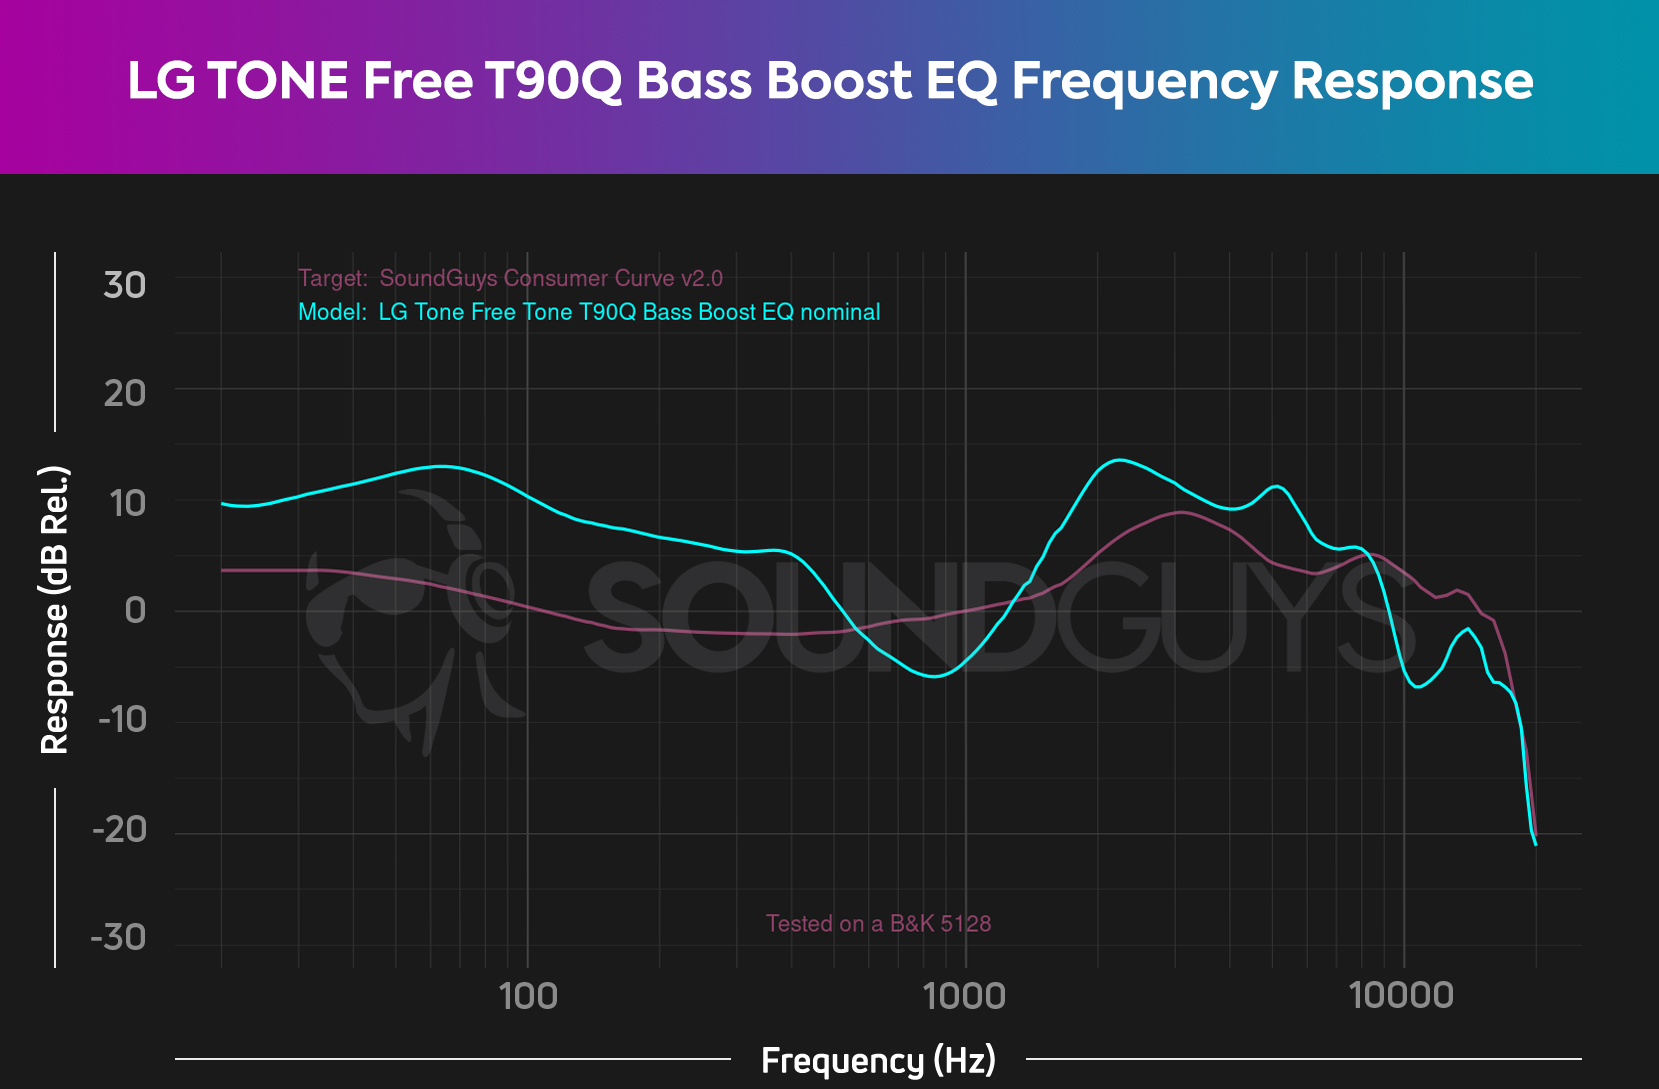 The frequency response chart for the LG TONE Free T90Q with the bass boost EQ, showing a big boost in the bass frequency.